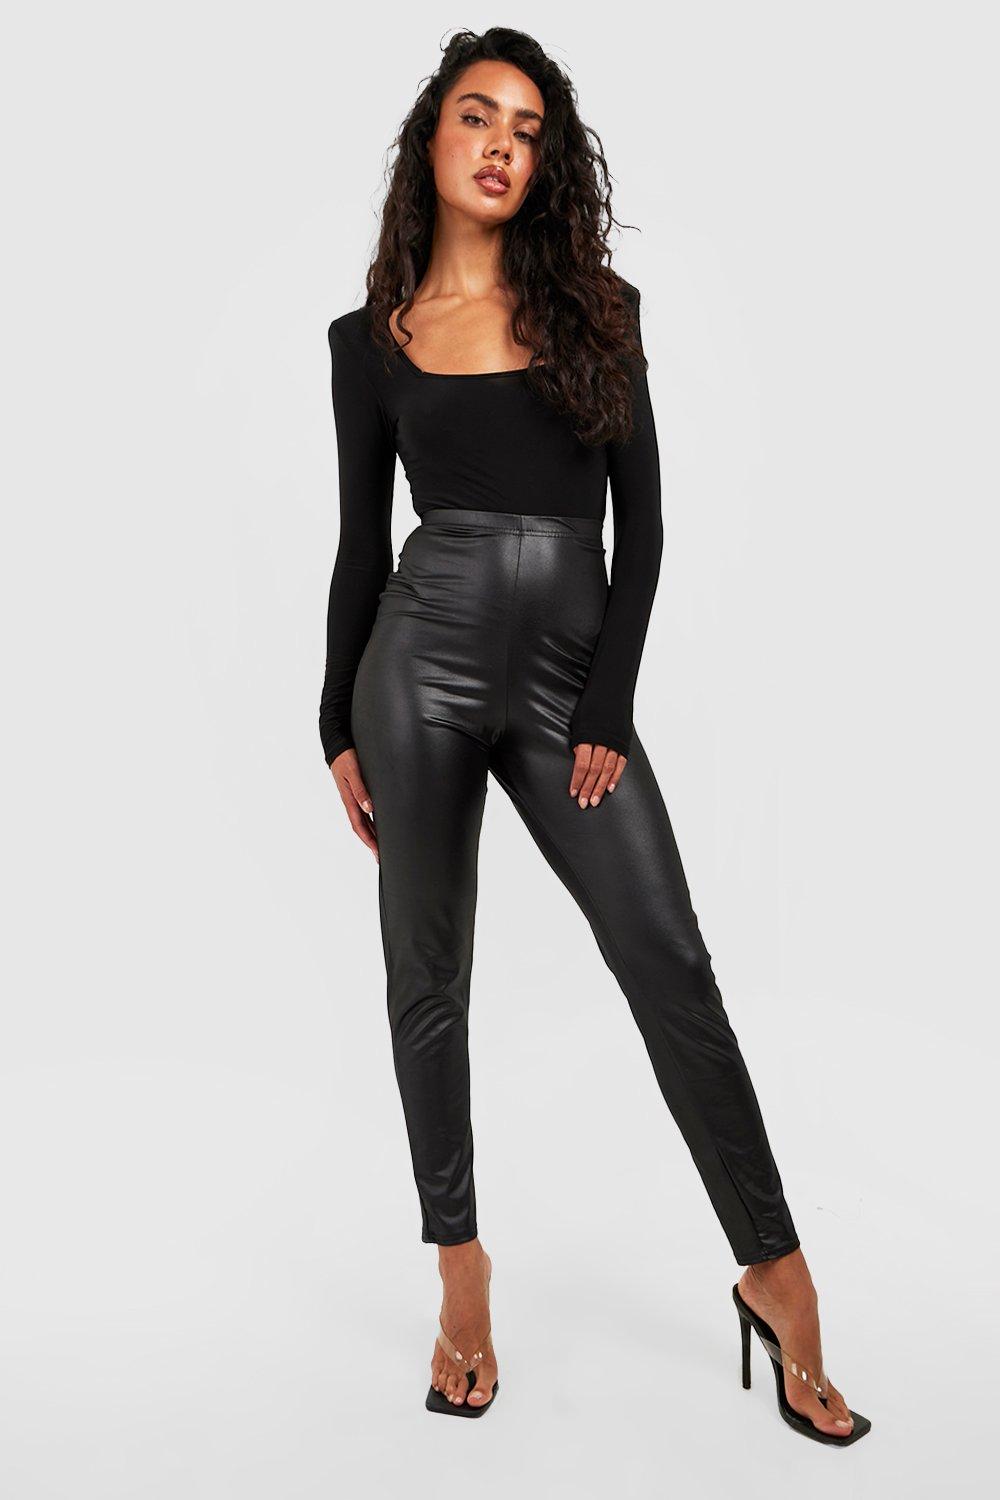 Women's High Waisted Leather Look Leggings